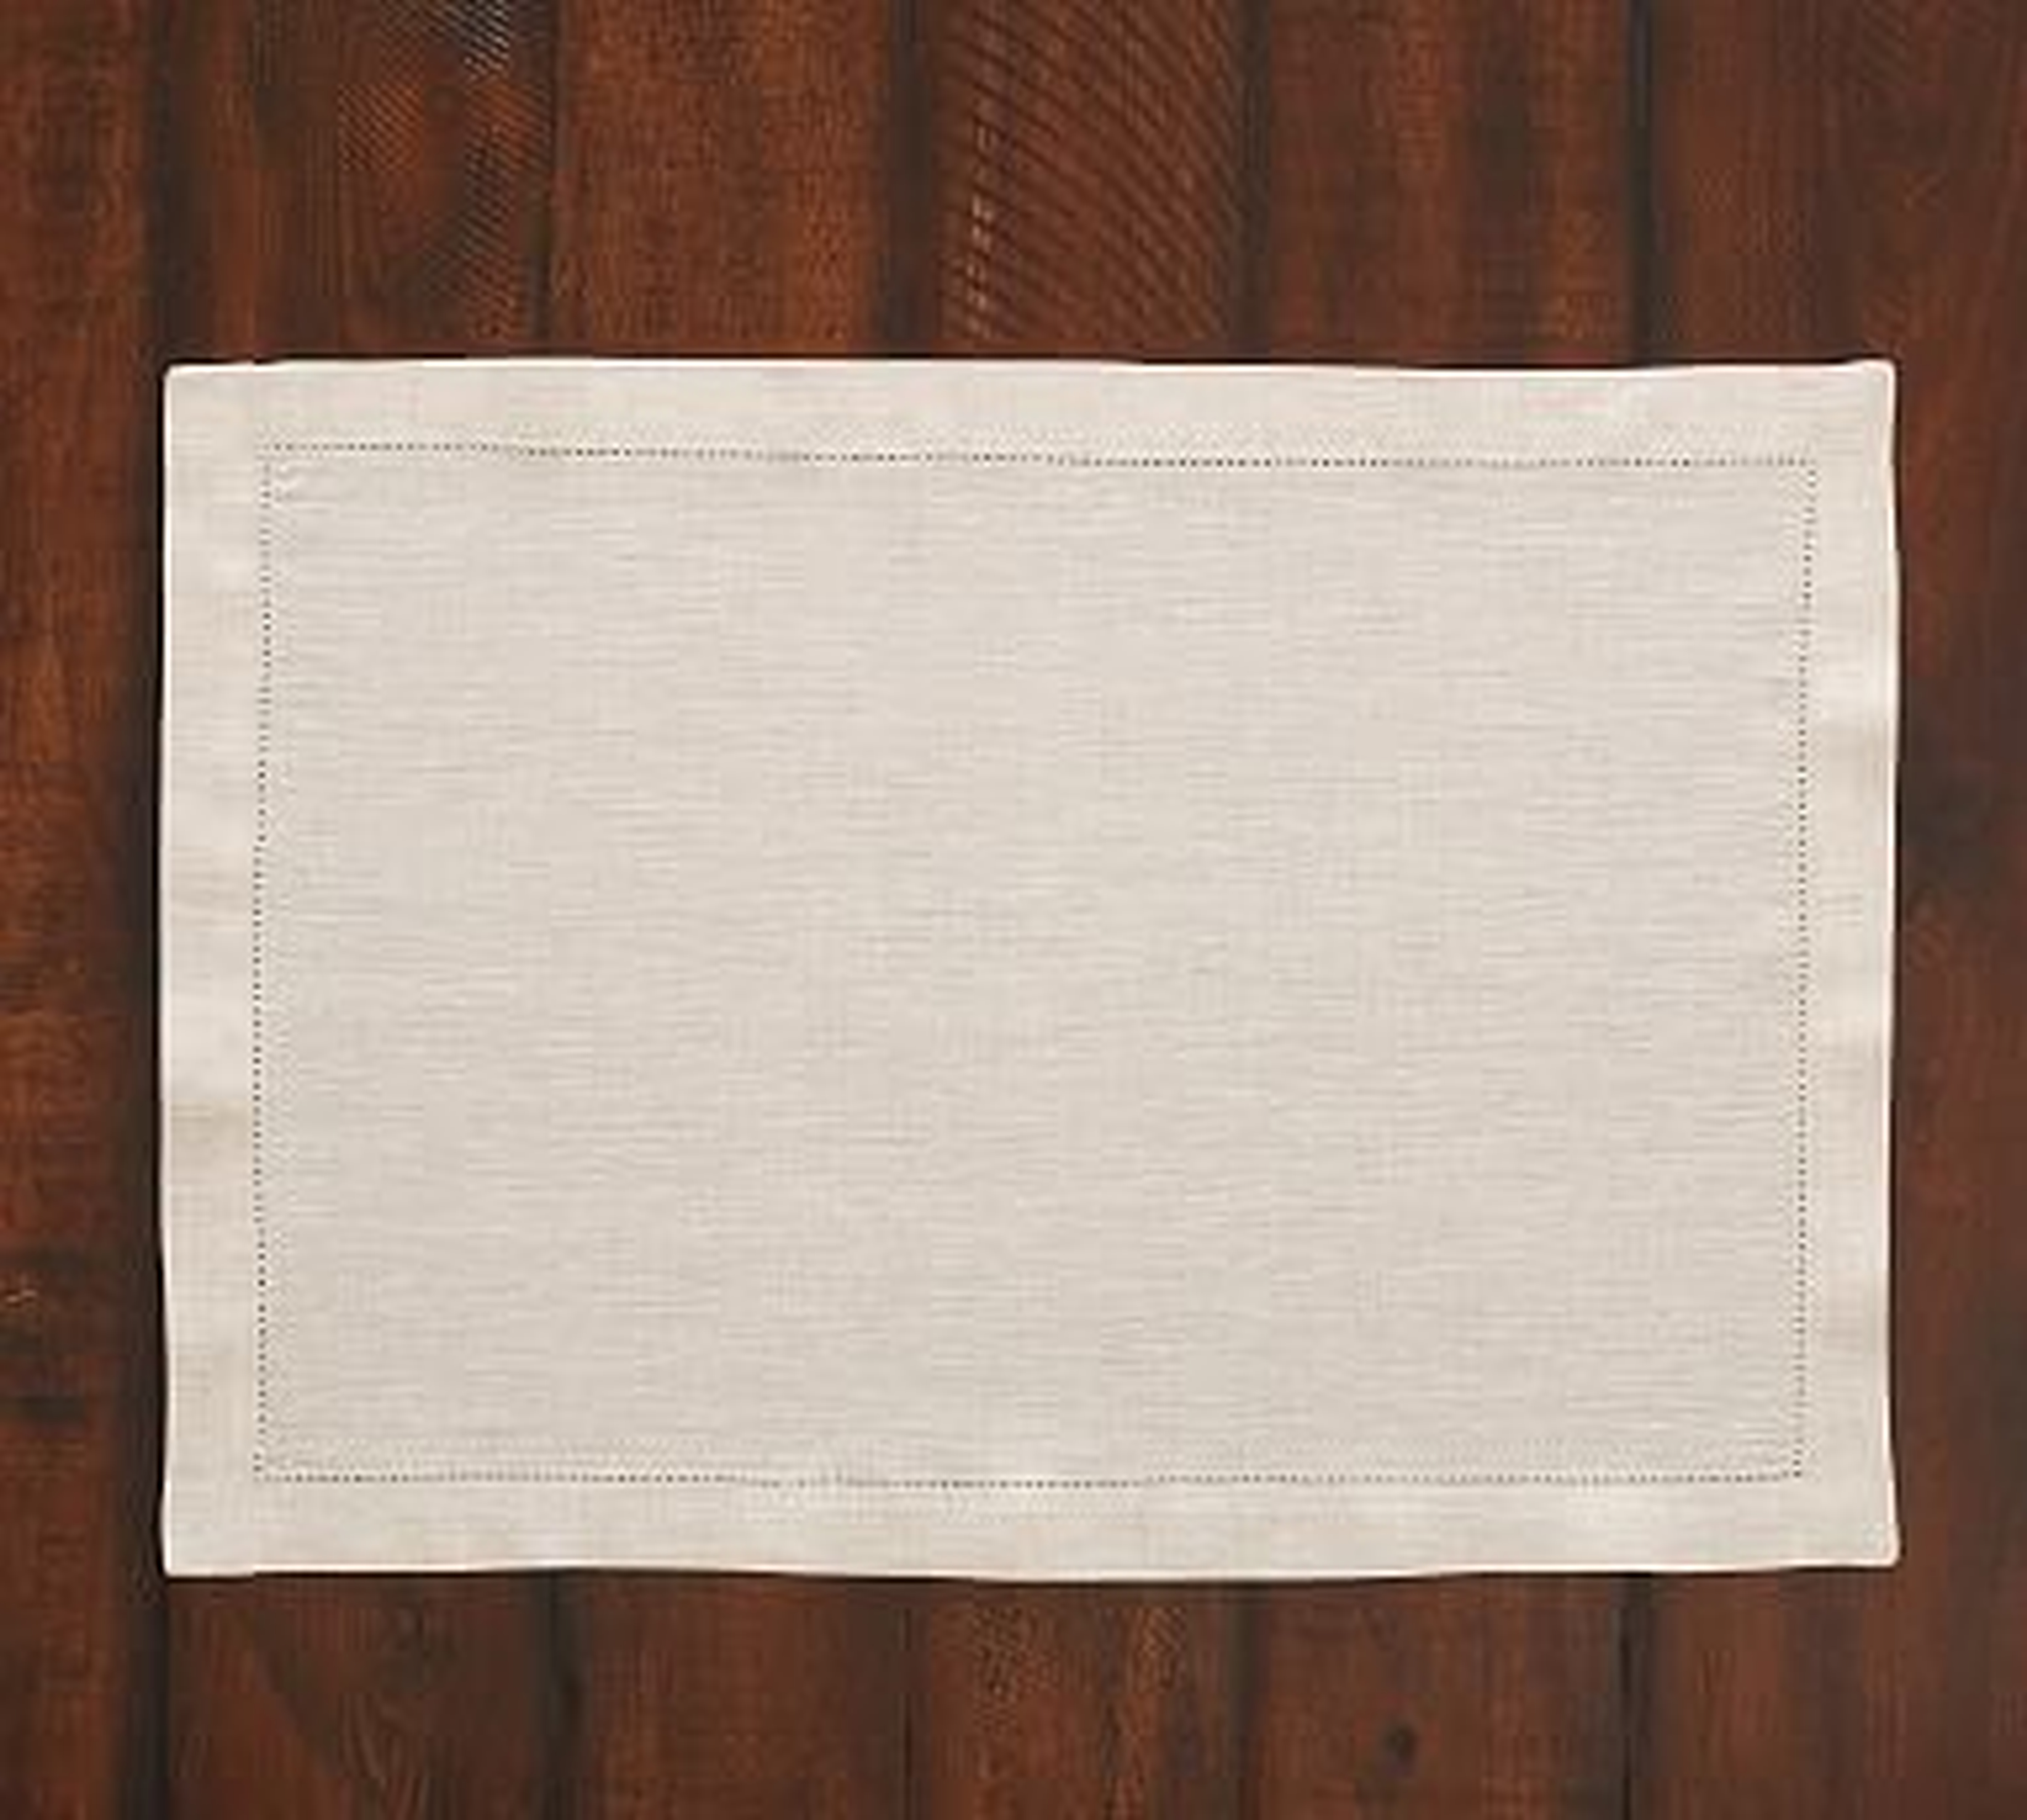 PB Classic Placemat, Set of 4 - Flax - Pottery Barn